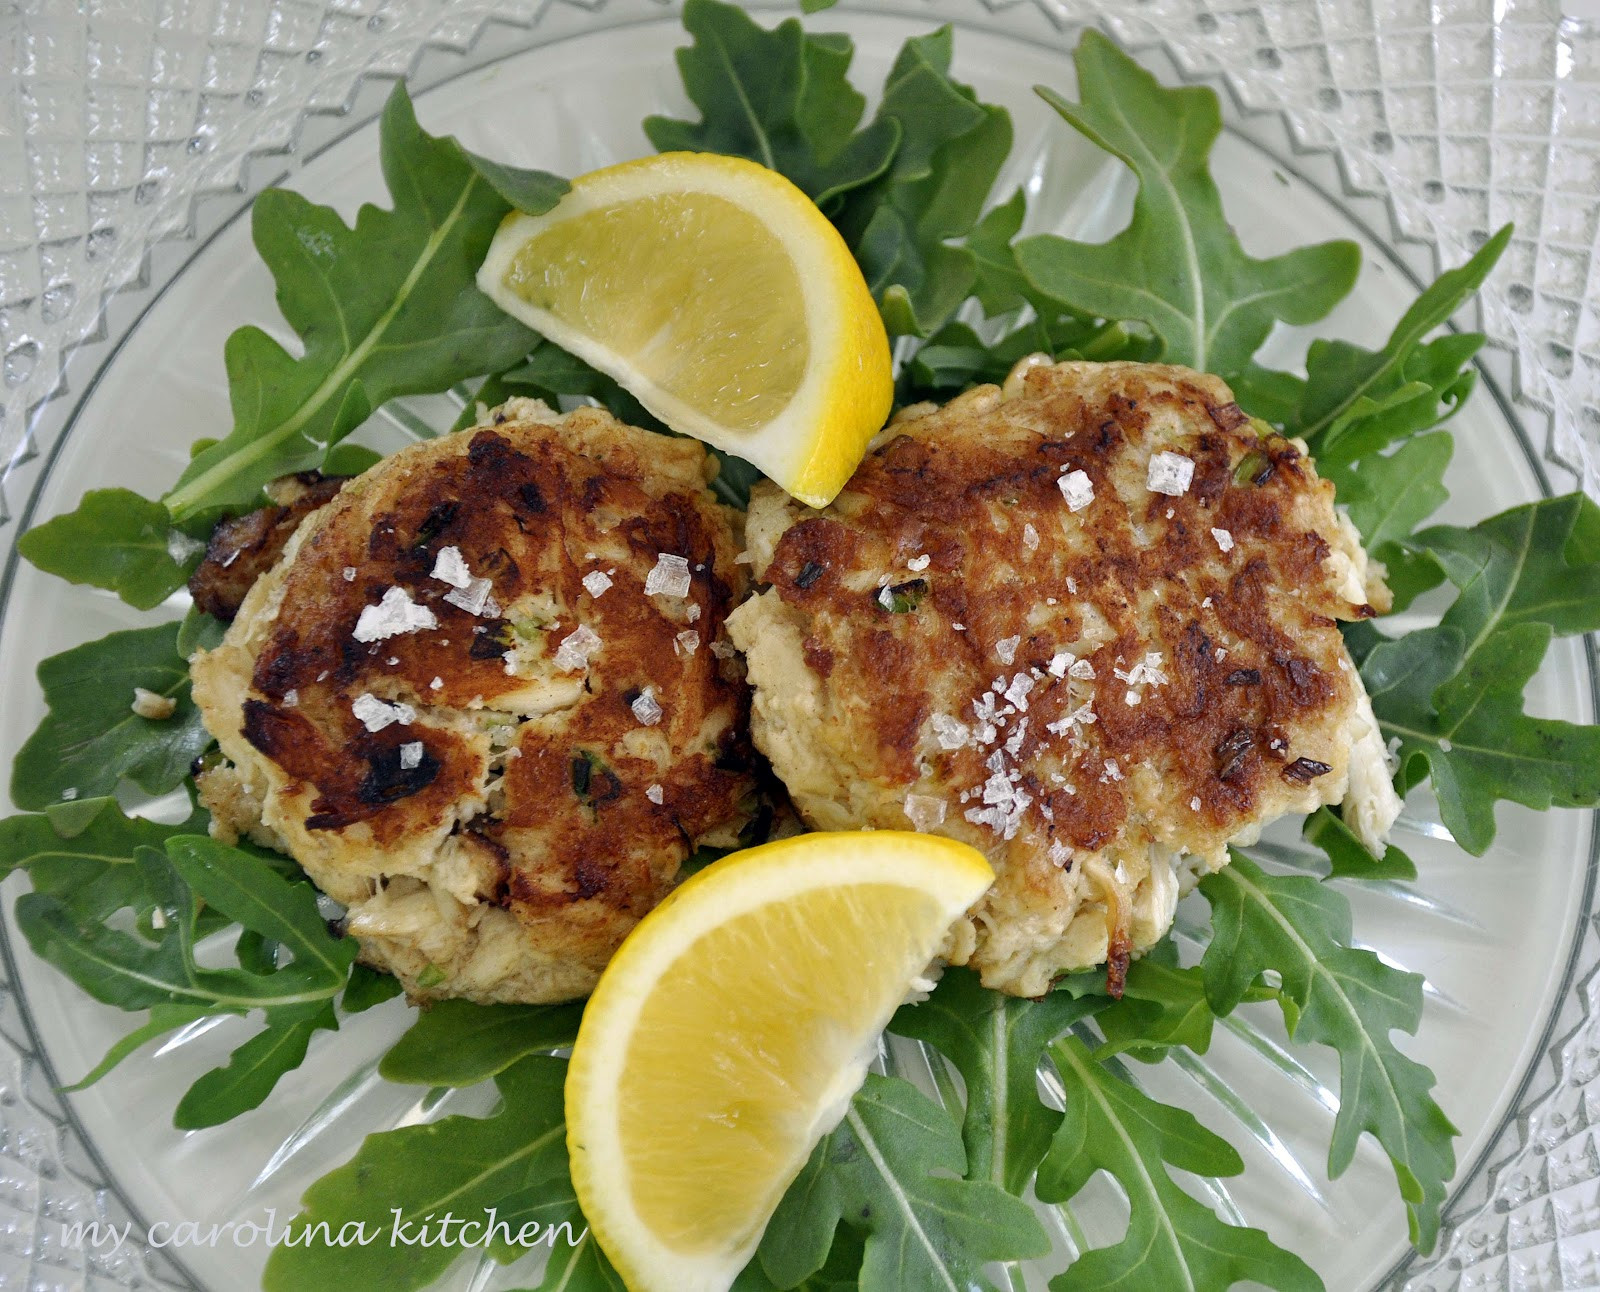 How To Cook Crab Cakes
 My Carolina Kitchen How to Make Great Crab Cakes